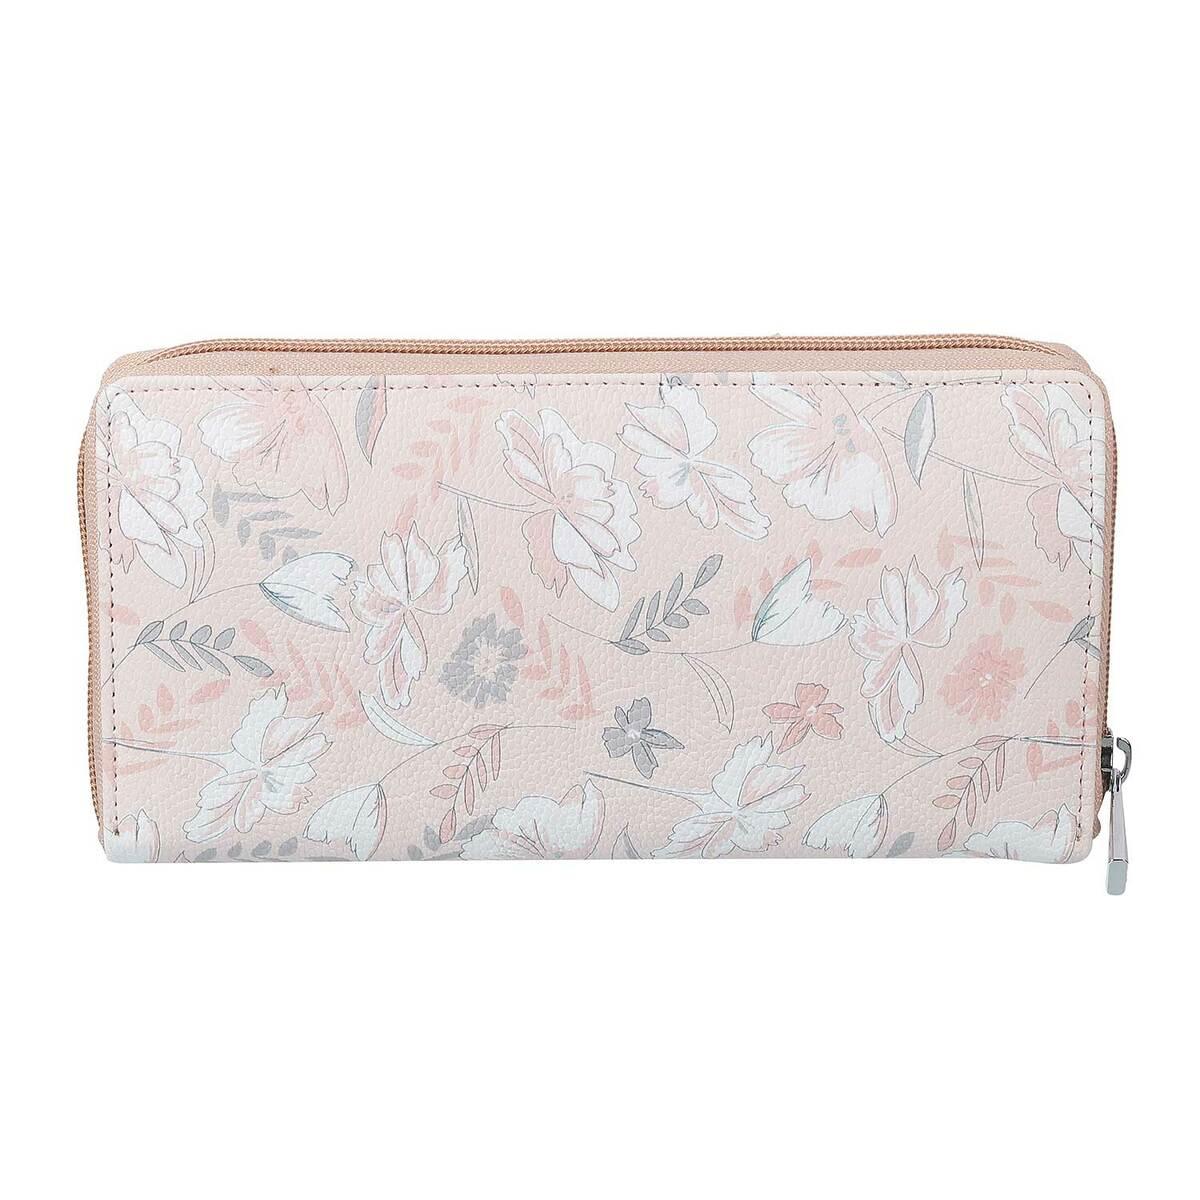 Chinese Embroidered Pink Floral Purse – Happy Panda Shop